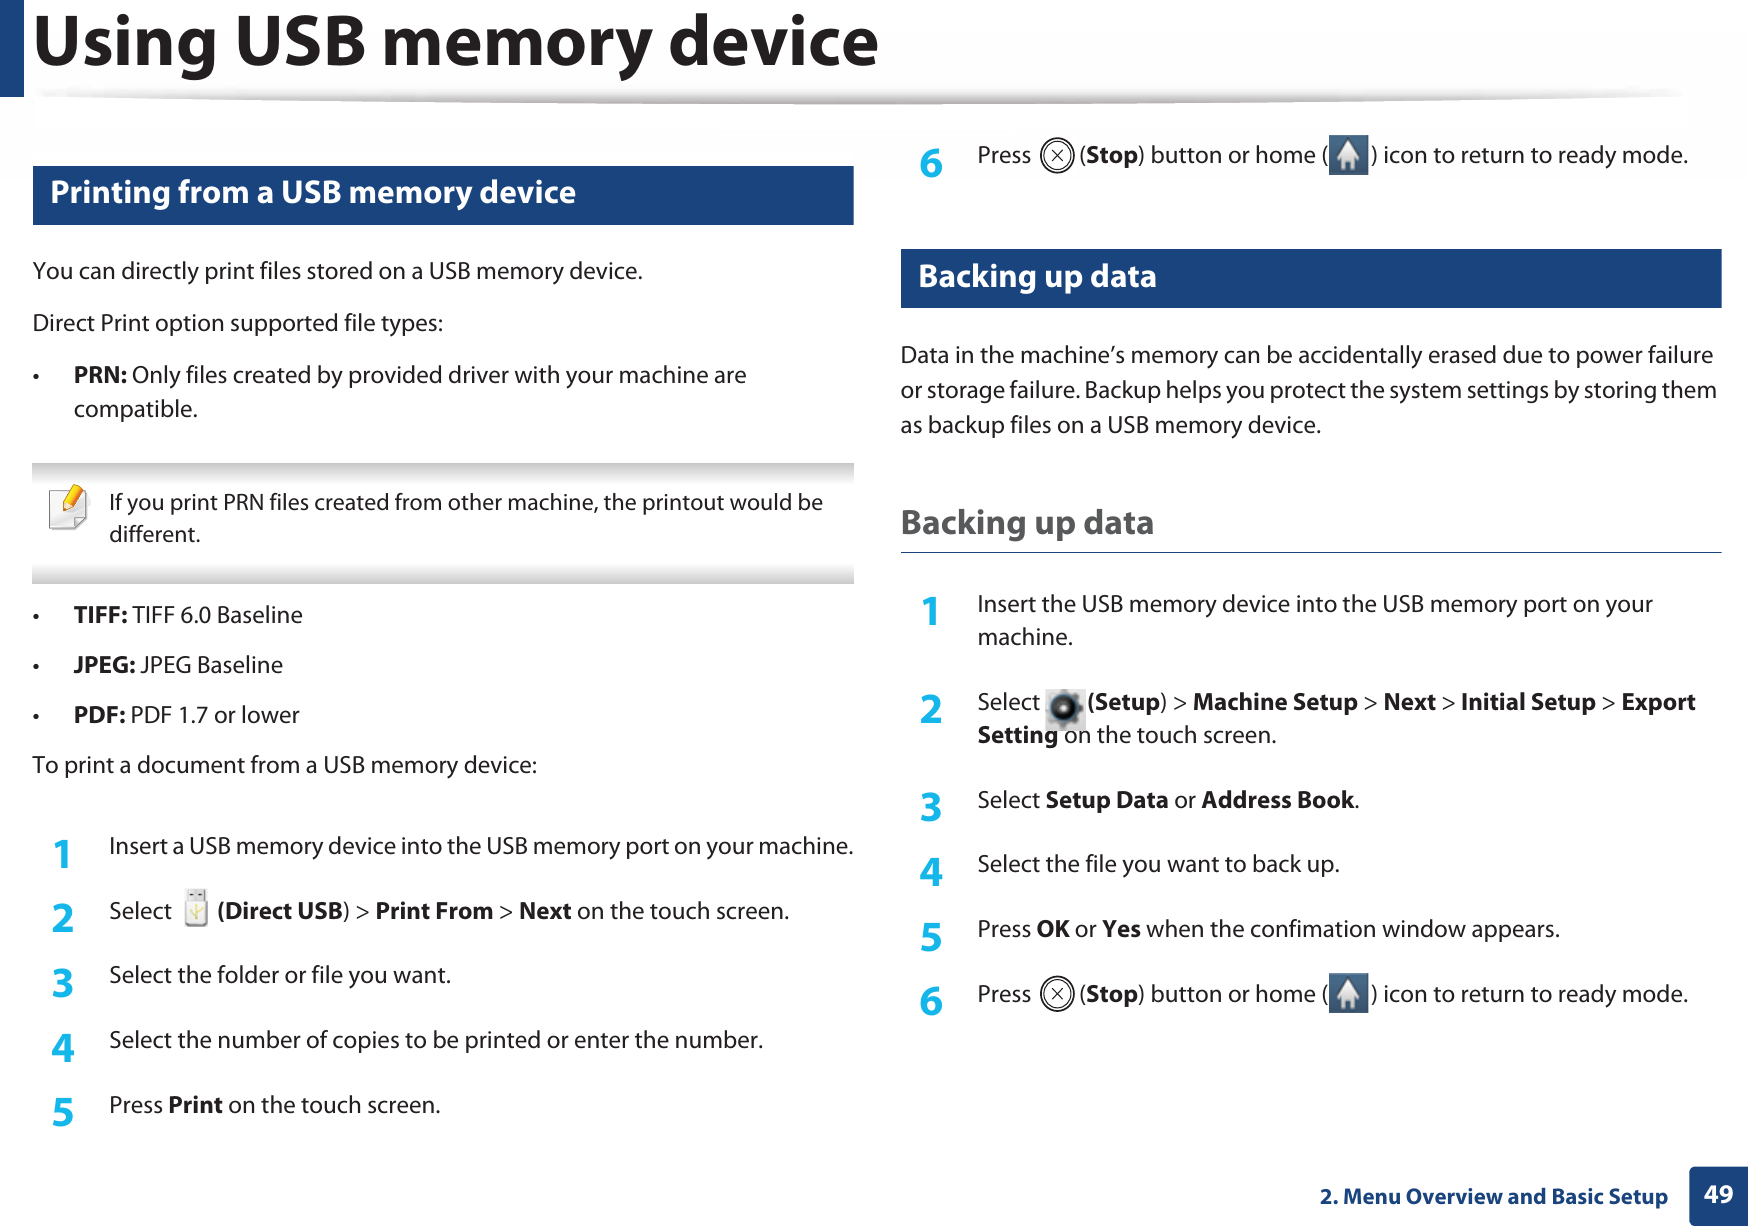 Using USB memory device492. Menu Overview and Basic Setup14 Printing from a USB memory deviceYou can directly print files stored on a USB memory device.Direct Print option supported file types:•PRN: Only files created by provided driver with your machine are compatible. If you print PRN files created from other machine, the printout would be different. •TIFF: TIFF 6.0 Baseline•JPEG: JPEG Baseline•PDF: PDF 1.7 or lowerTo print a document from a USB memory device:1Insert a USB memory device into the USB memory port on your machine.2  Select   (Direct USB) &gt; Print From &gt; Next on the touch screen.3  Select the folder or file you want. 4  Select the number of copies to be printed or enter the number.5  Press Print on the touch screen.6  Press (Stop) button or home ( ) icon to return to ready mode.15 Backing up data Data in the machine’s memory can be accidentally erased due to power failure or storage failure. Backup helps you protect the system settings by storing them as backup files on a USB memory device.Backing up data1Insert the USB memory device into the USB memory port on your machine.2  Select (Setup) &gt; Machine Setup &gt; Next &gt; Initial Setup &gt; Export Setting on the touch screen.3  Select Setup Data or Address Book.4  Select the file you want to back up.5  Press OK or Yes when the confimation window appears.6  Press (Stop) button or home ( ) icon to return to ready mode.